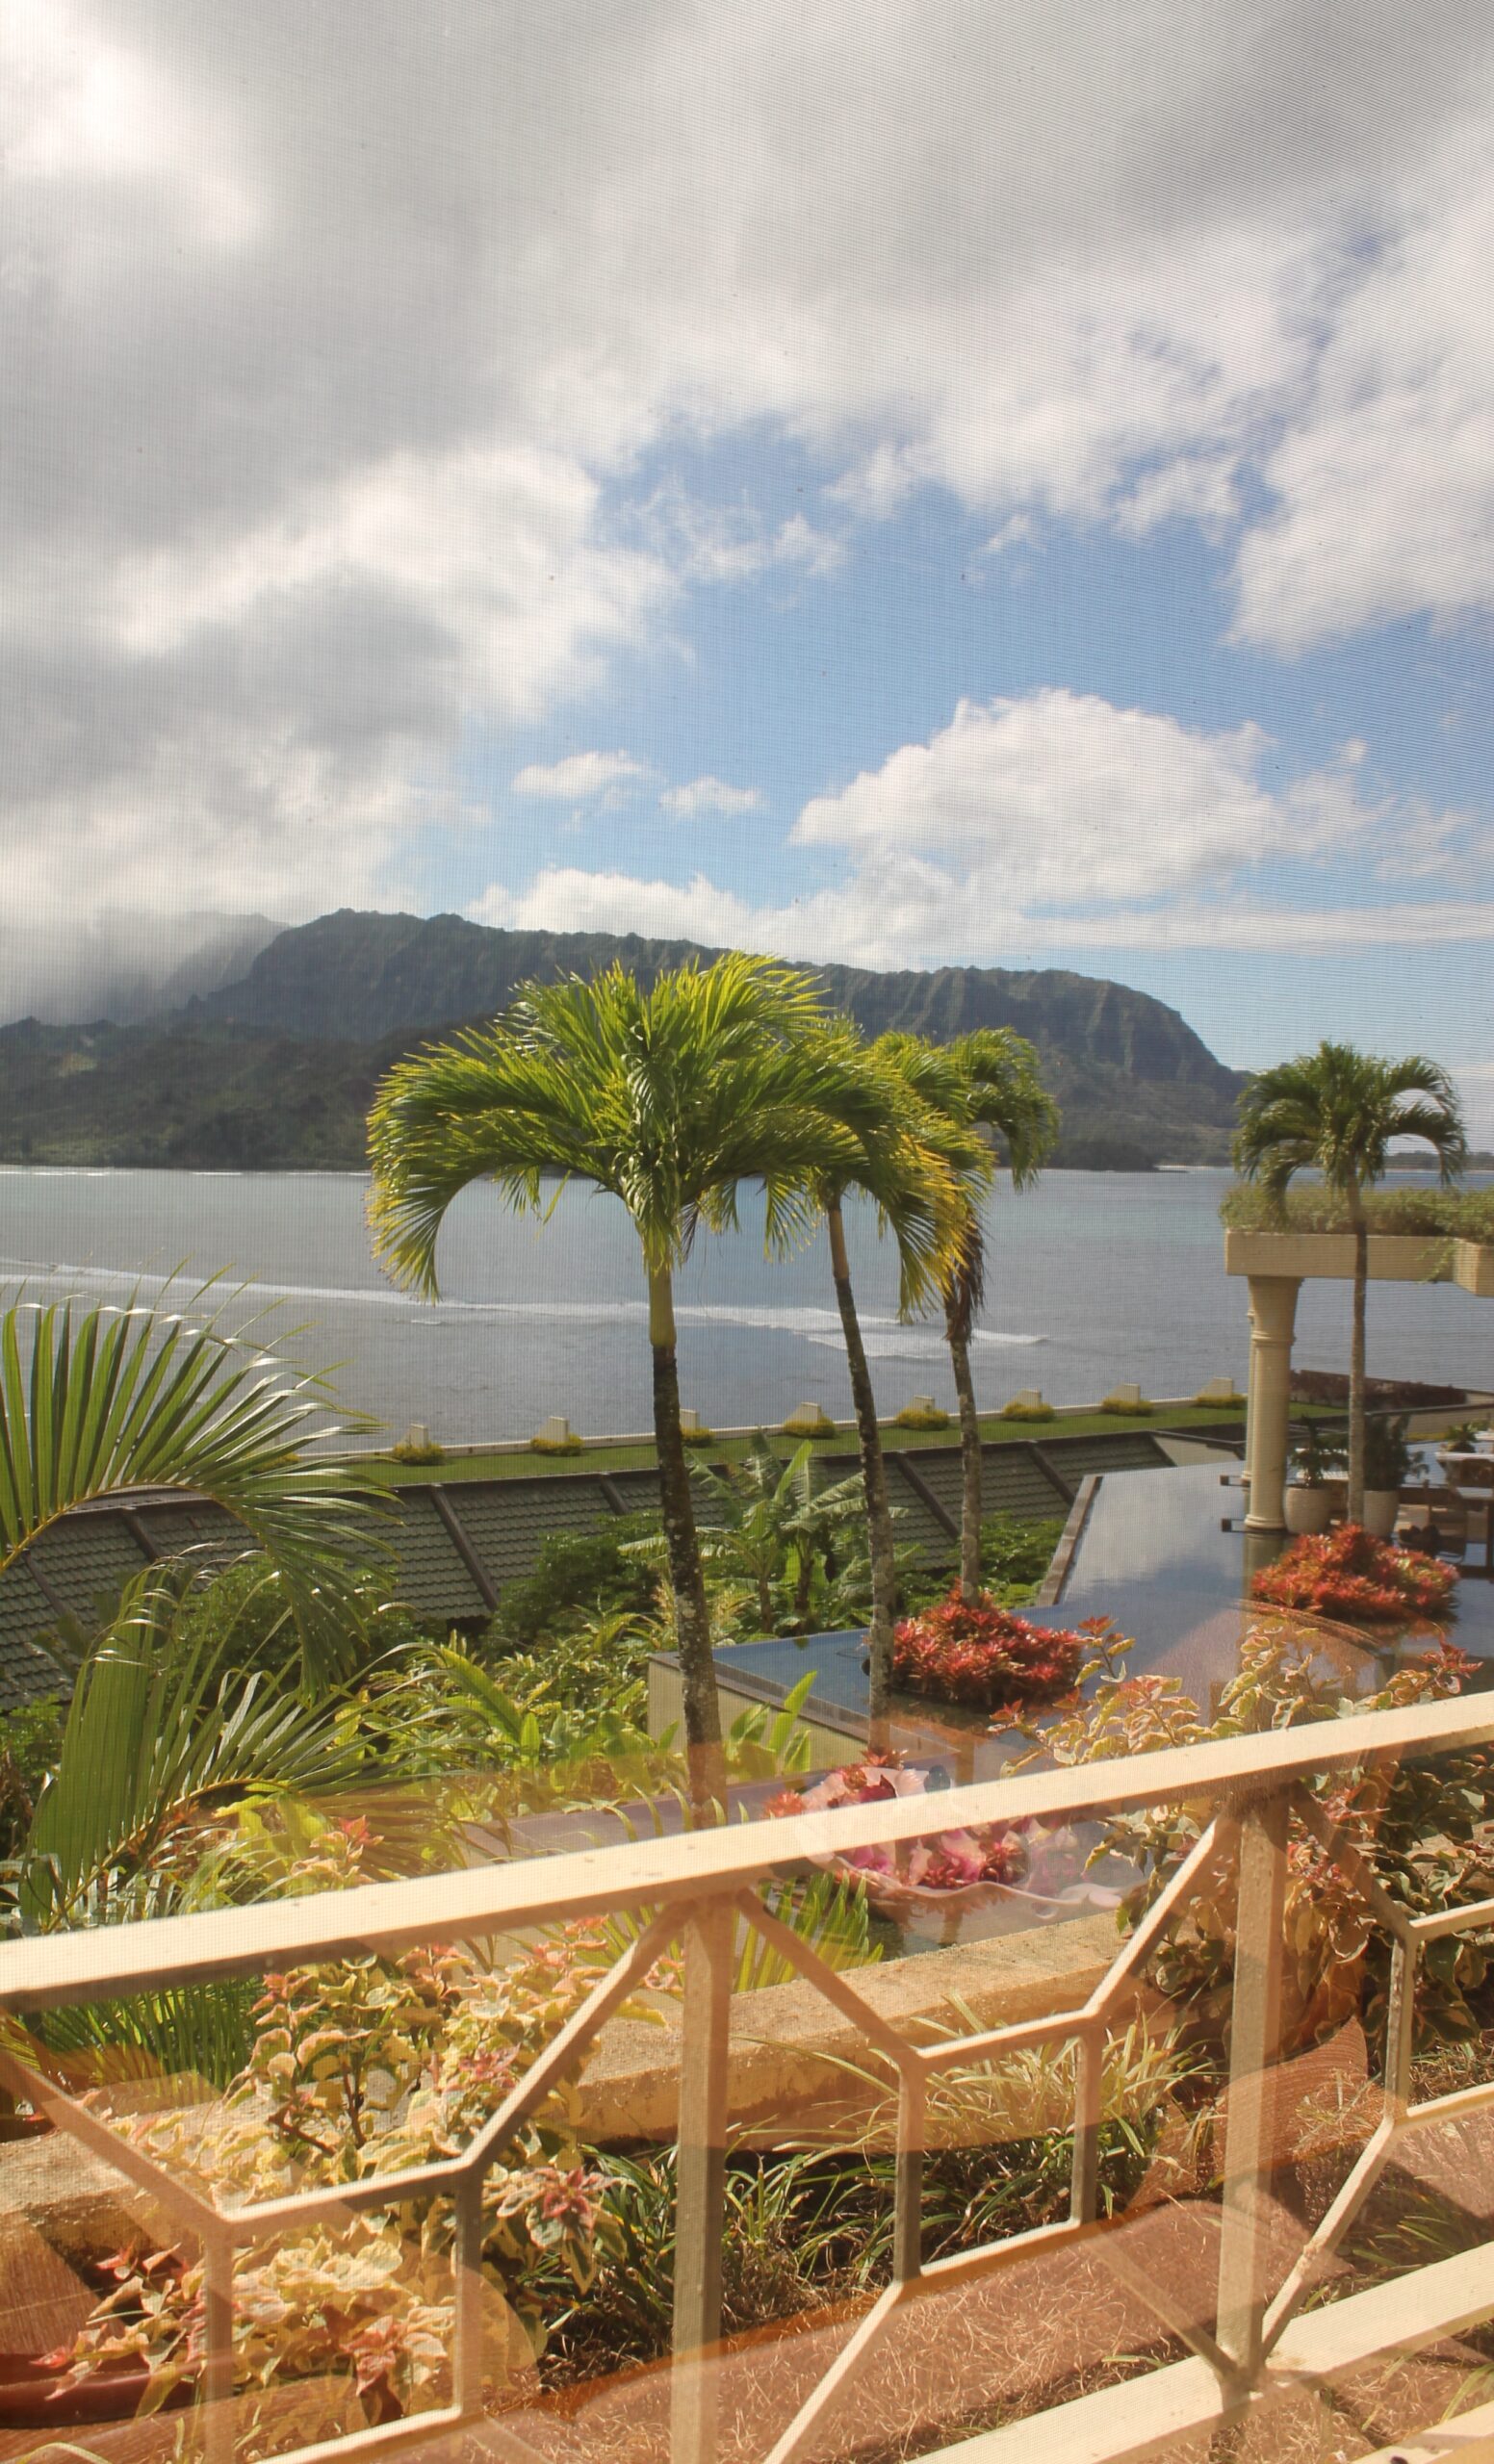 Overlooking a slice of heaven, Hanalei Bay, from our Prince Junior Suite at the St. Regis Princeville in Kauai, Hawaii. (Photo: Super G)